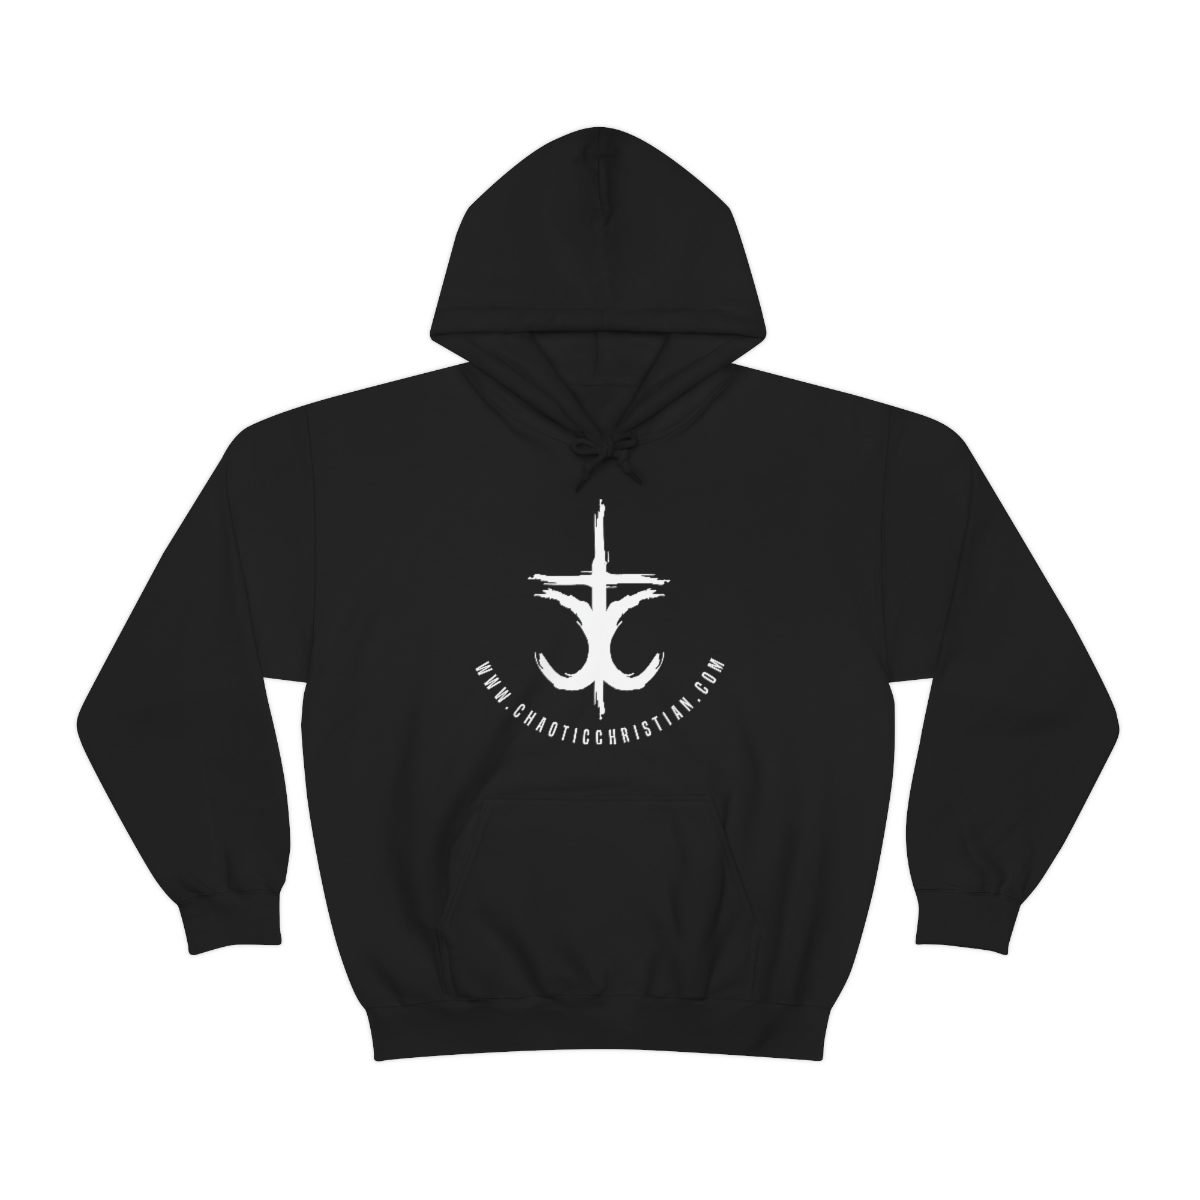 The Chaotic Christian – Cross Pullover Hooded Sweatshirt